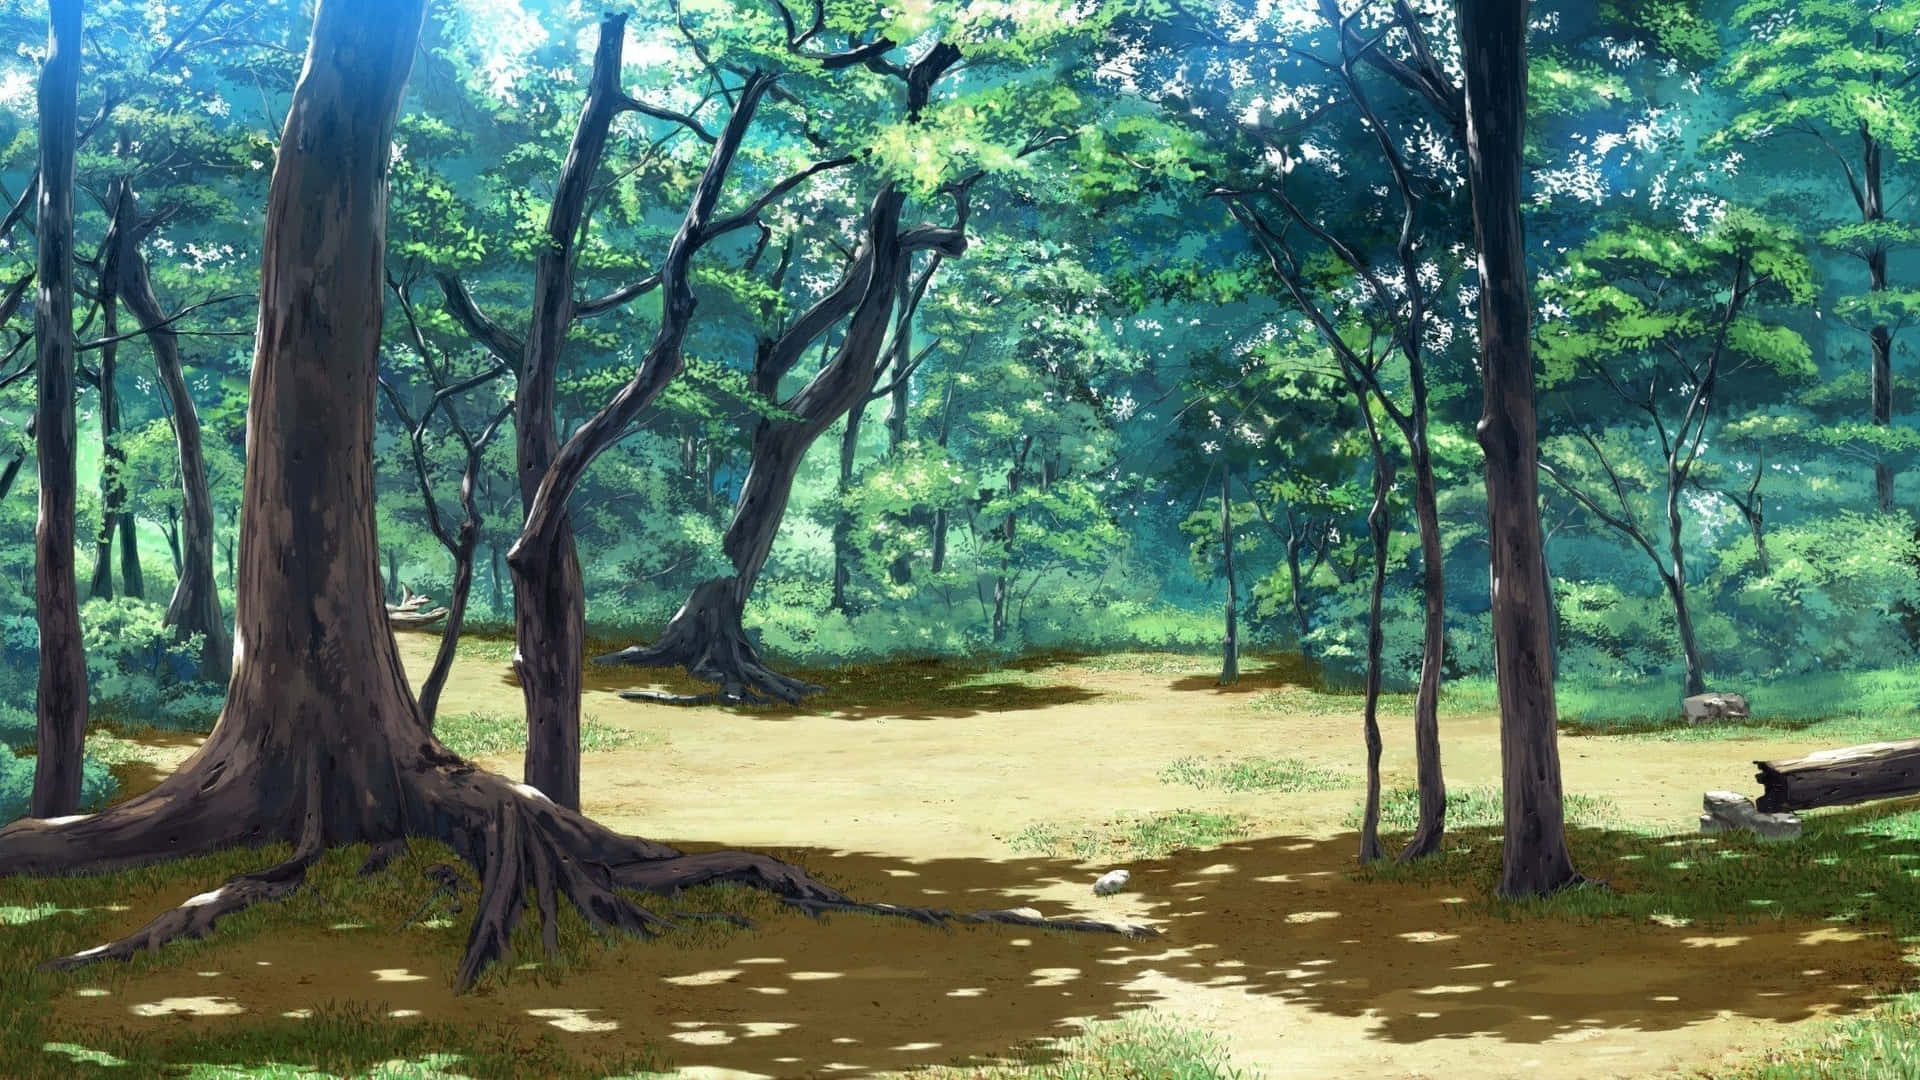 "Explore the enchanted Anime Forest for limitless adventure!" Wallpaper